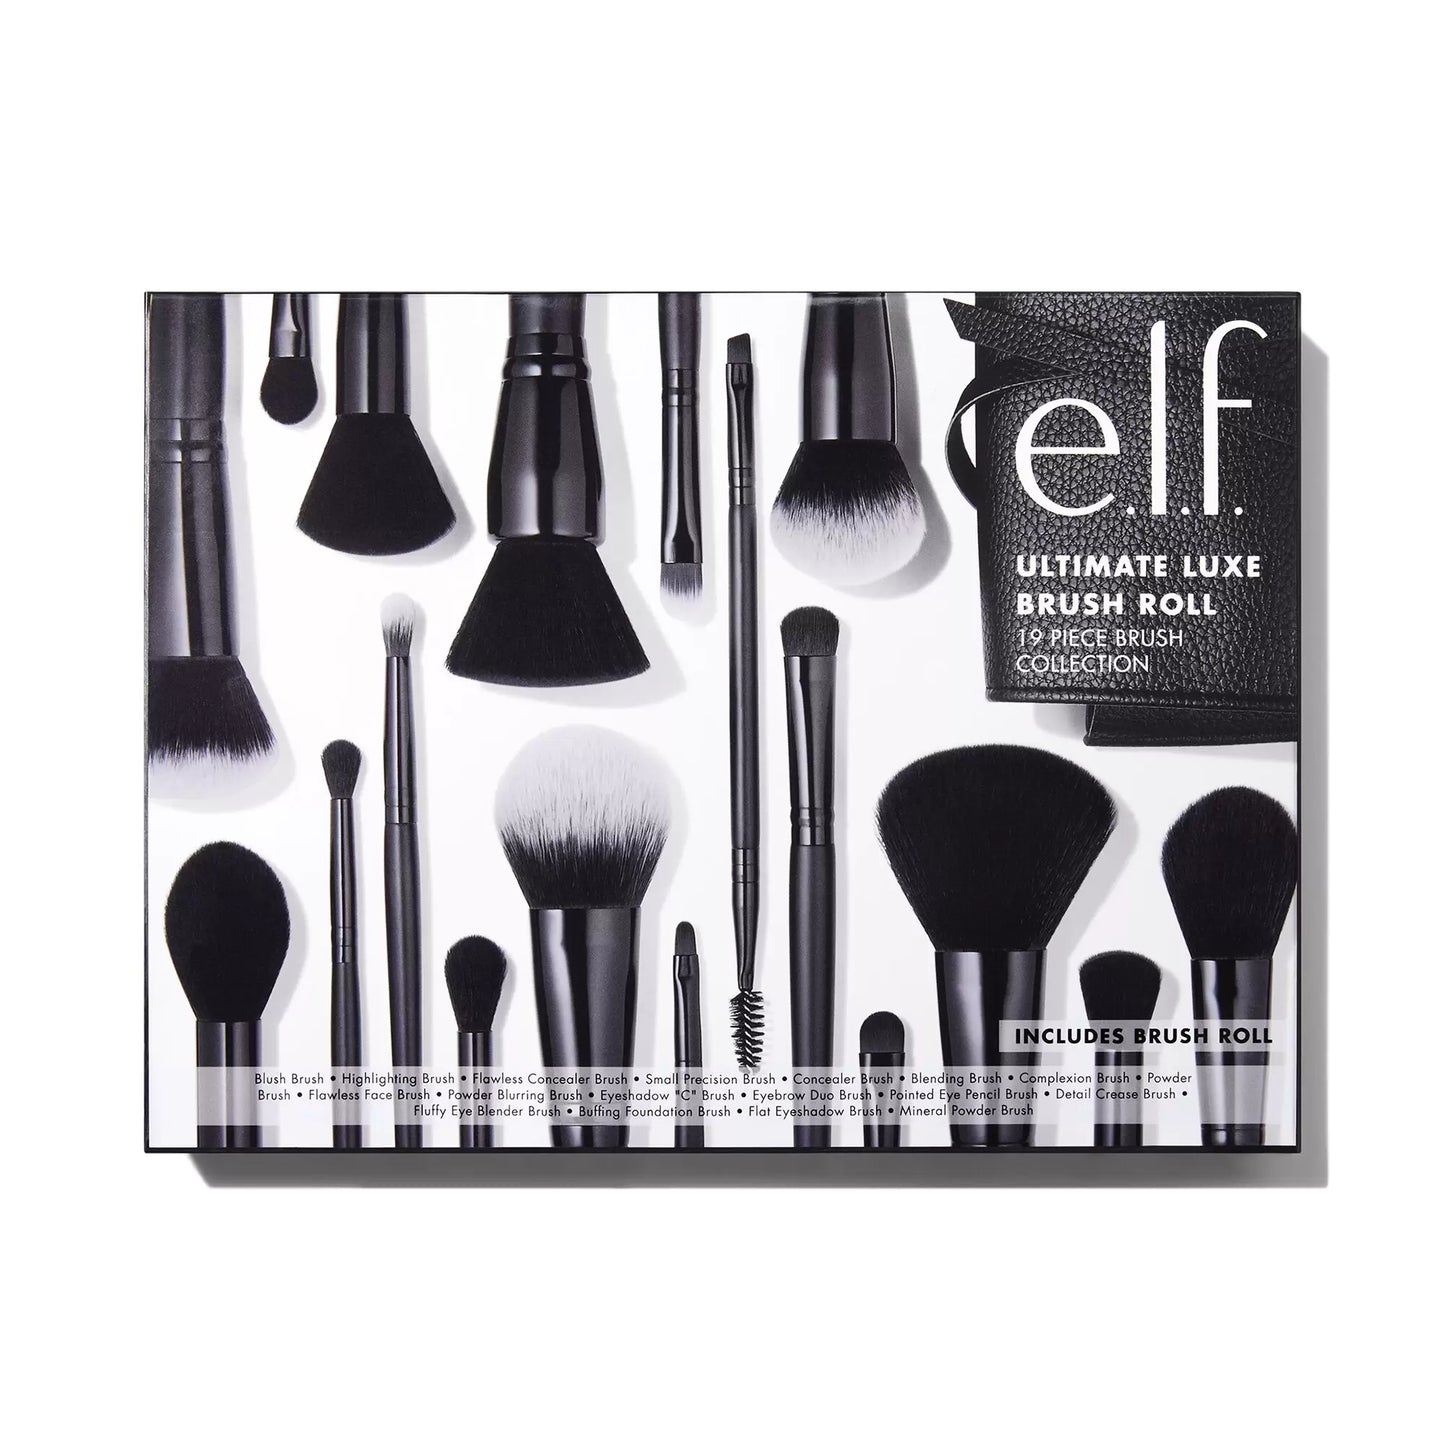 e.l.f. Ultimate Luxe Brush Roll 19 Piece Brush Collection